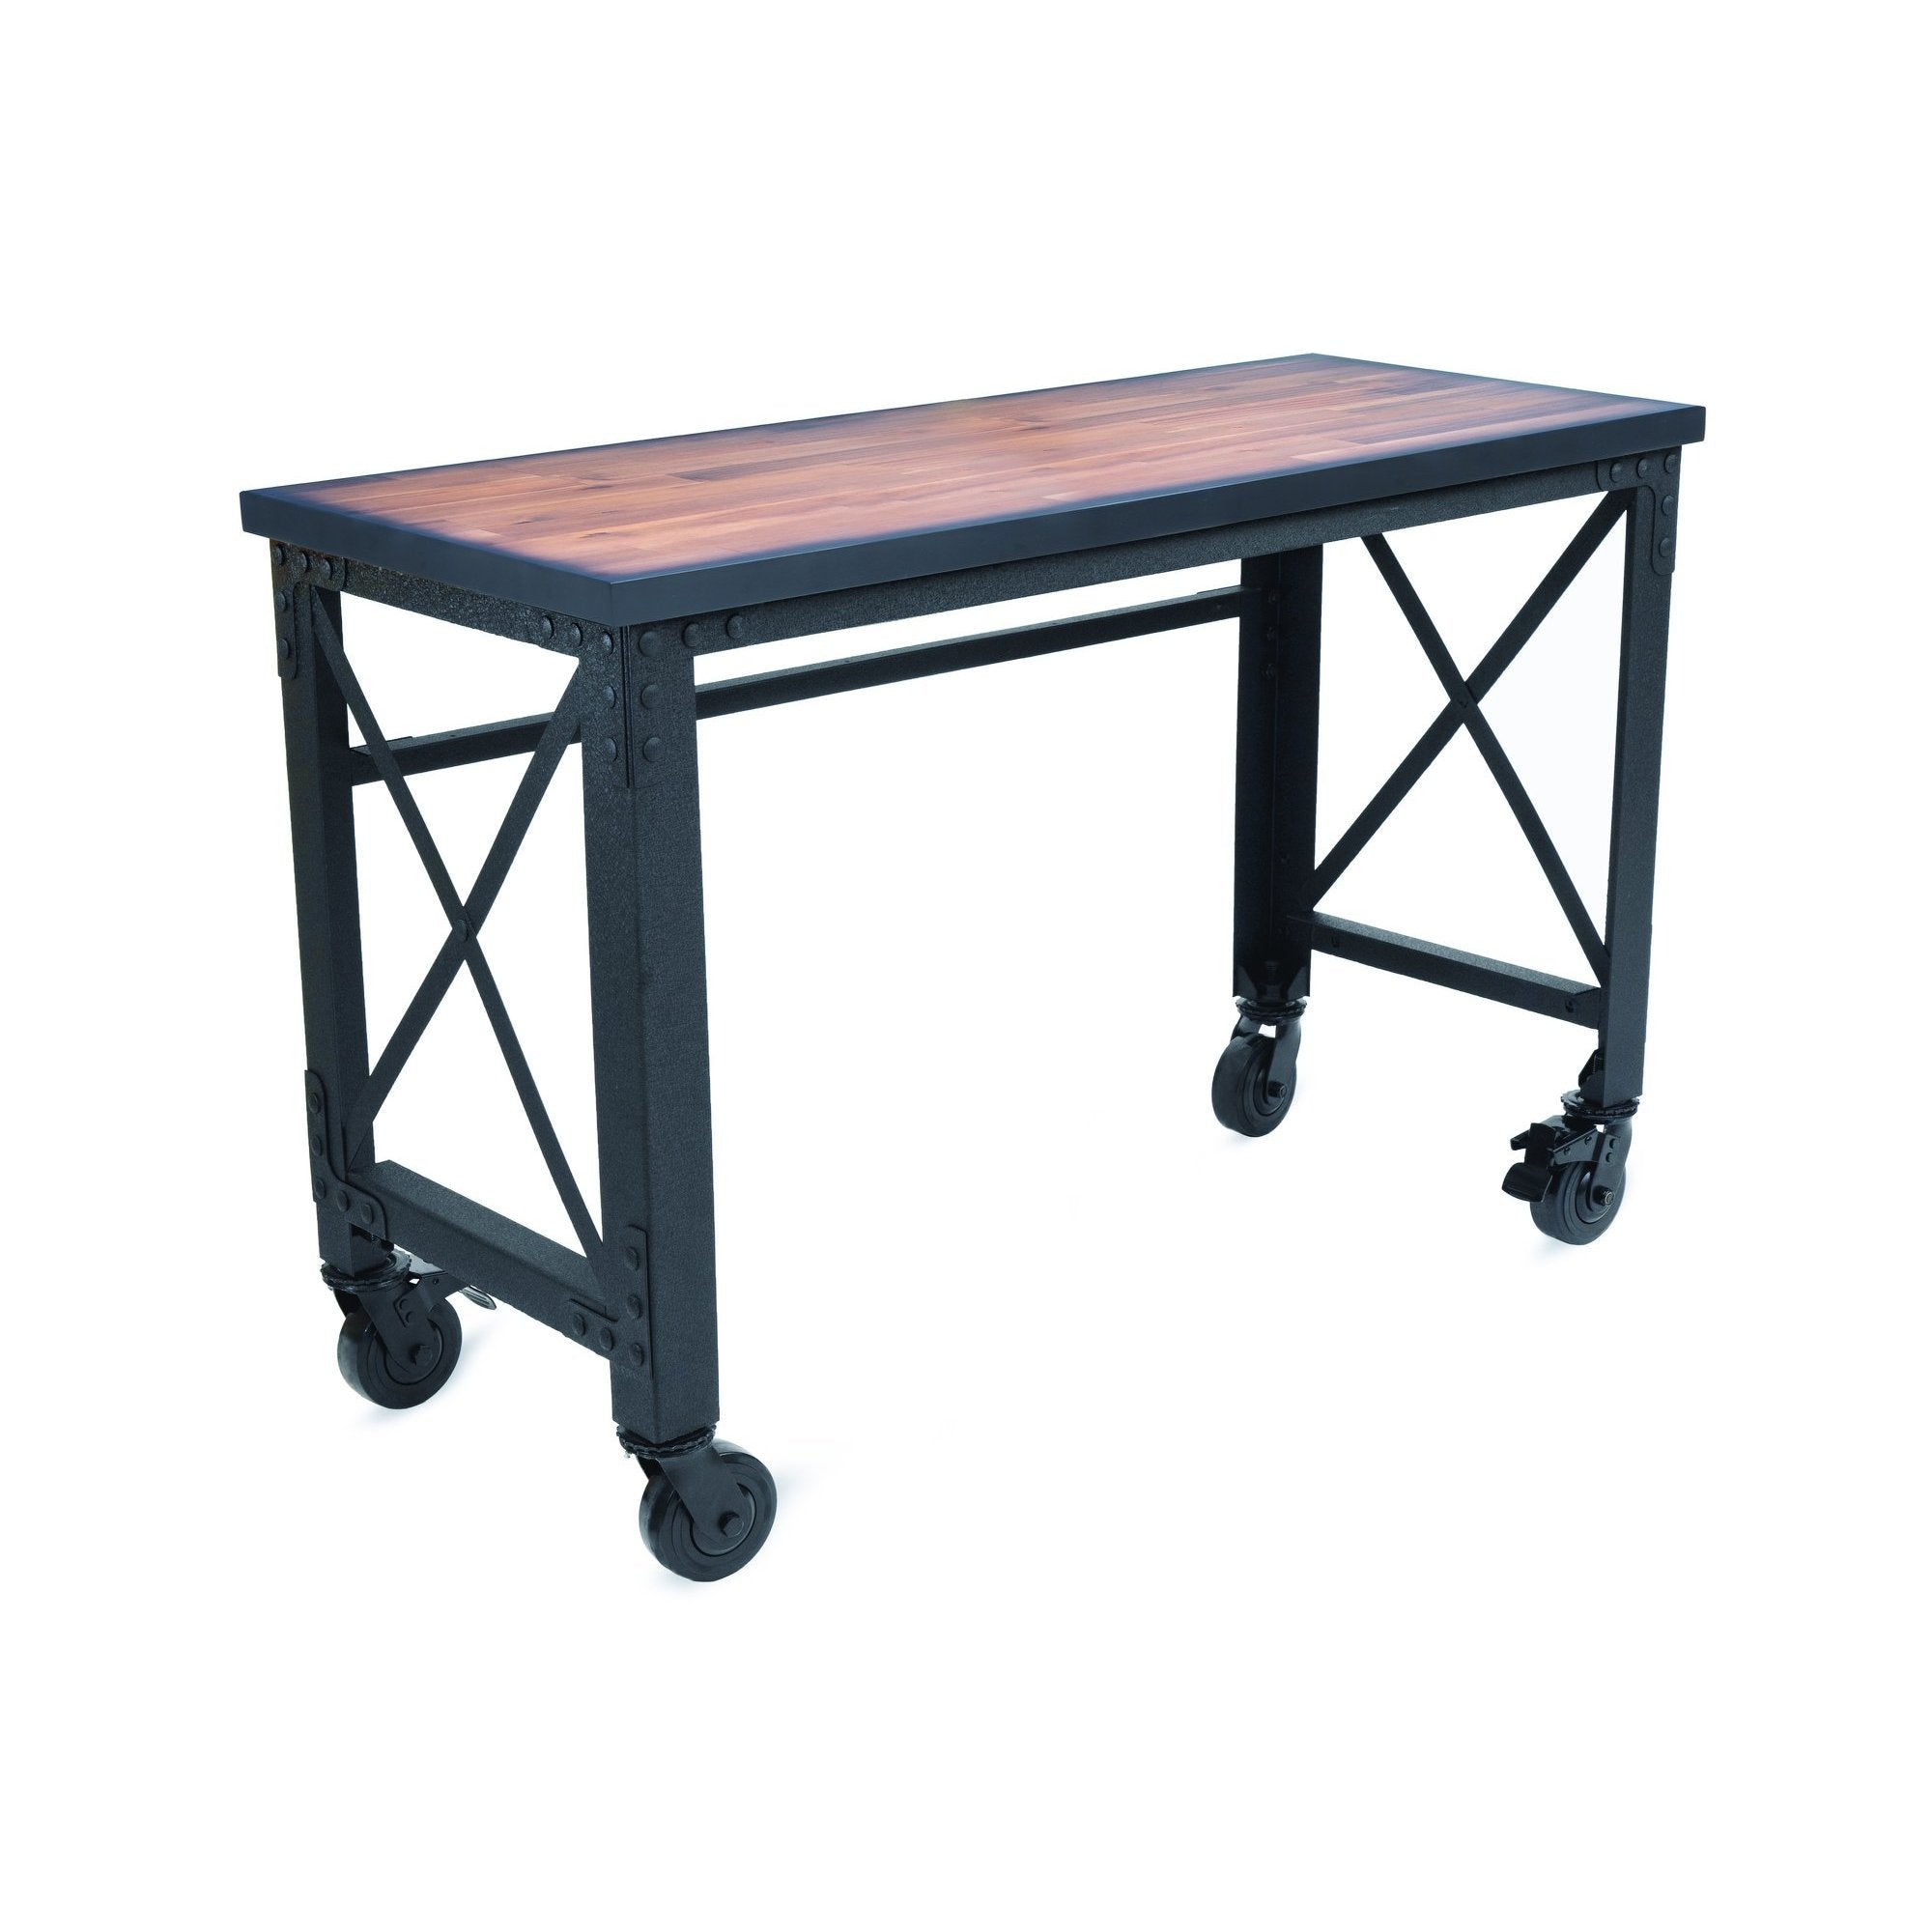 Durasheds furniture 52 in. x 24 in. Duramax Rolling Industrial Desk with Wooden Top (4 Size Options)